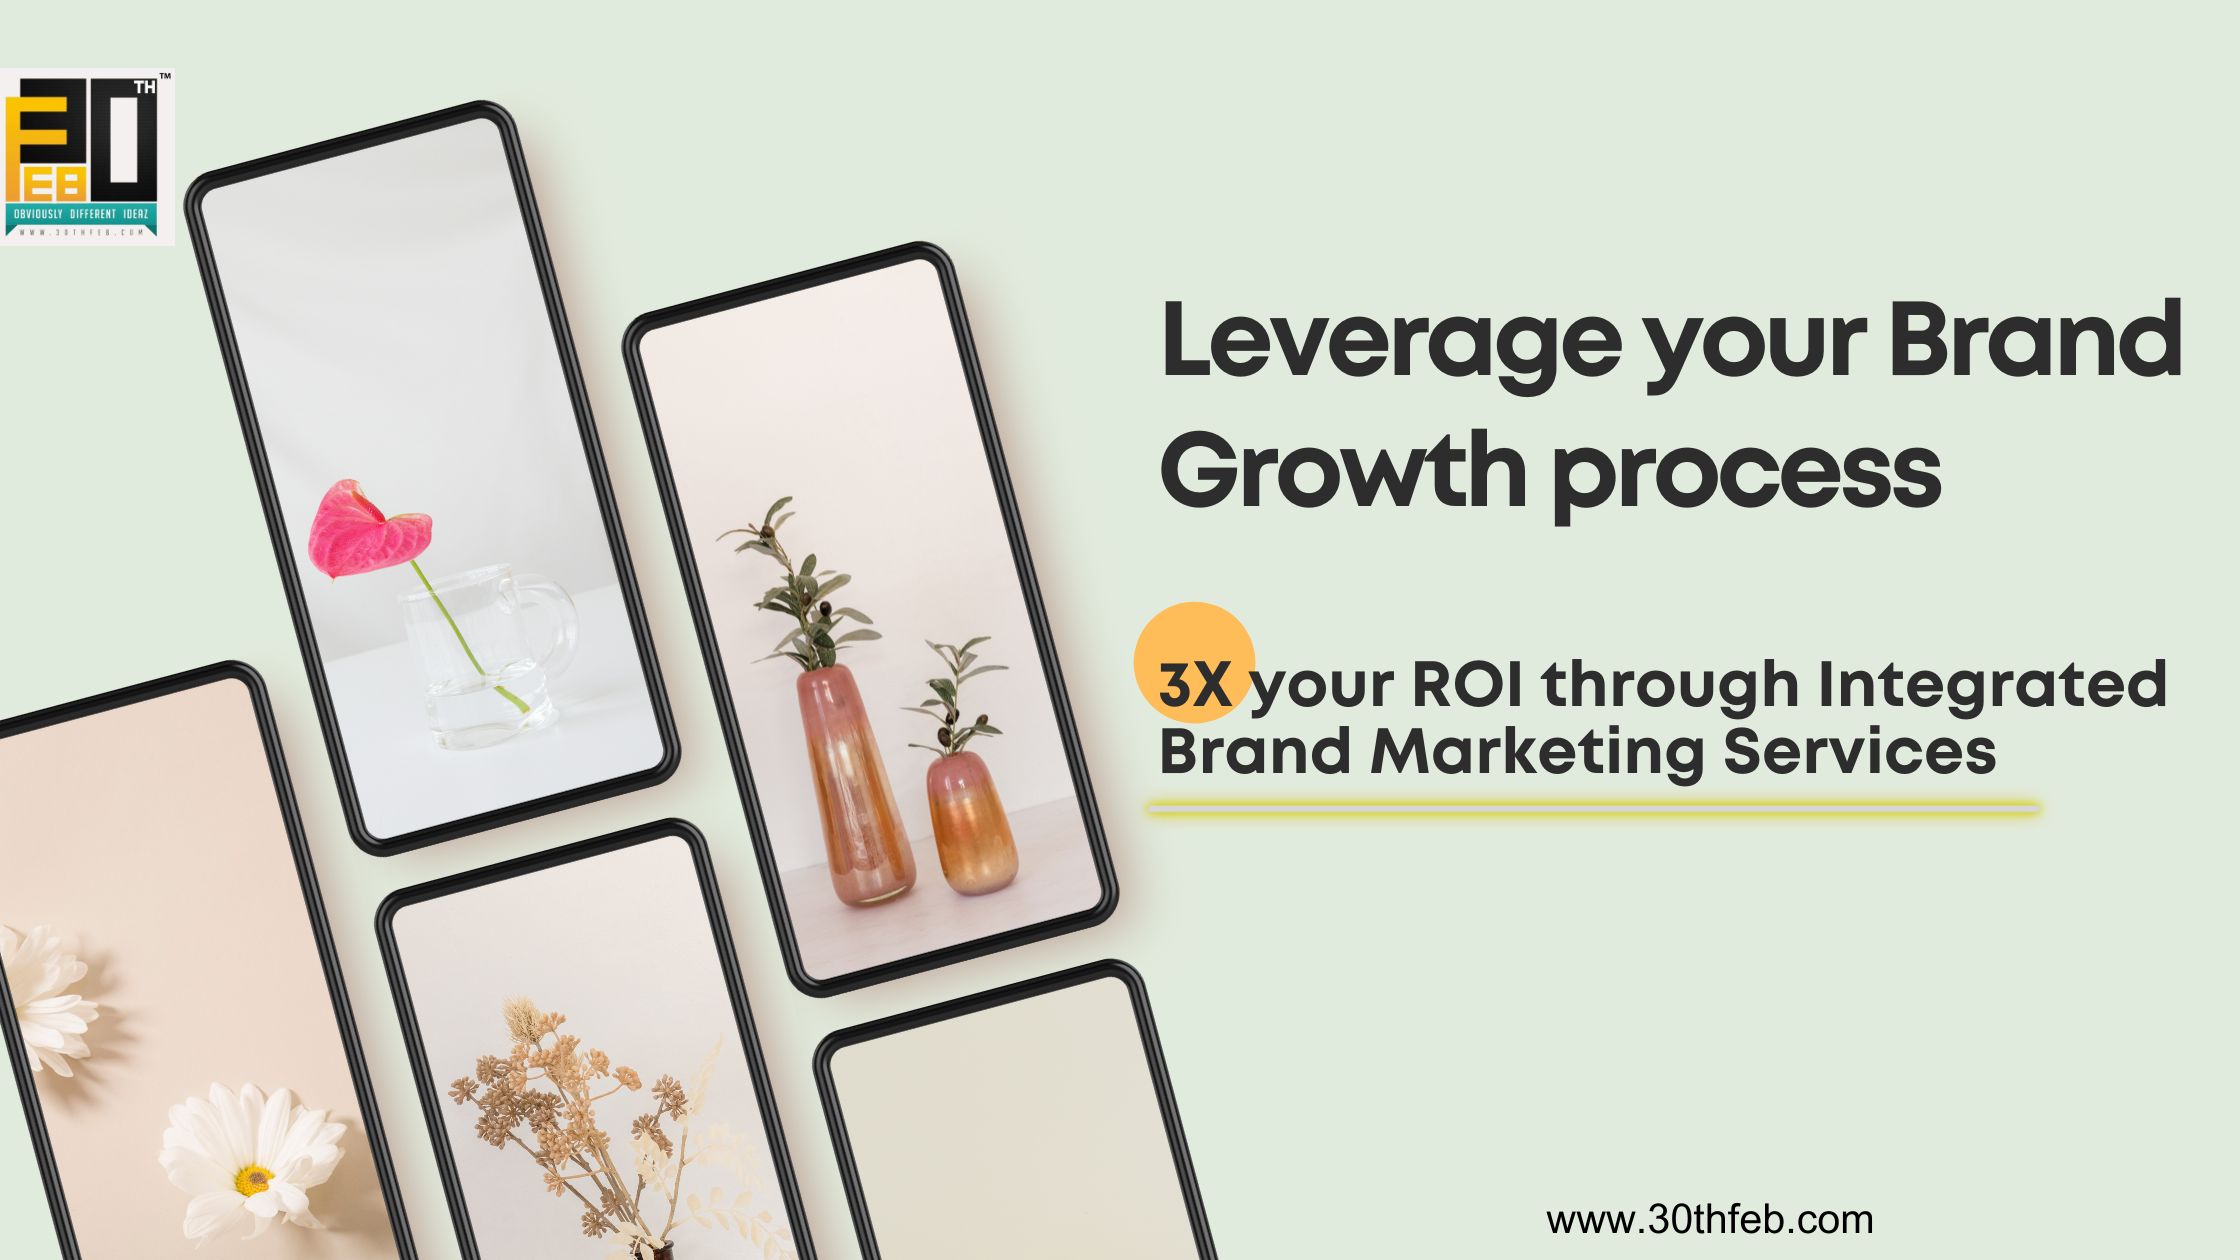 Leverage your Brand Growth process and 3x the ROI through Integrated Brand Marketing Services